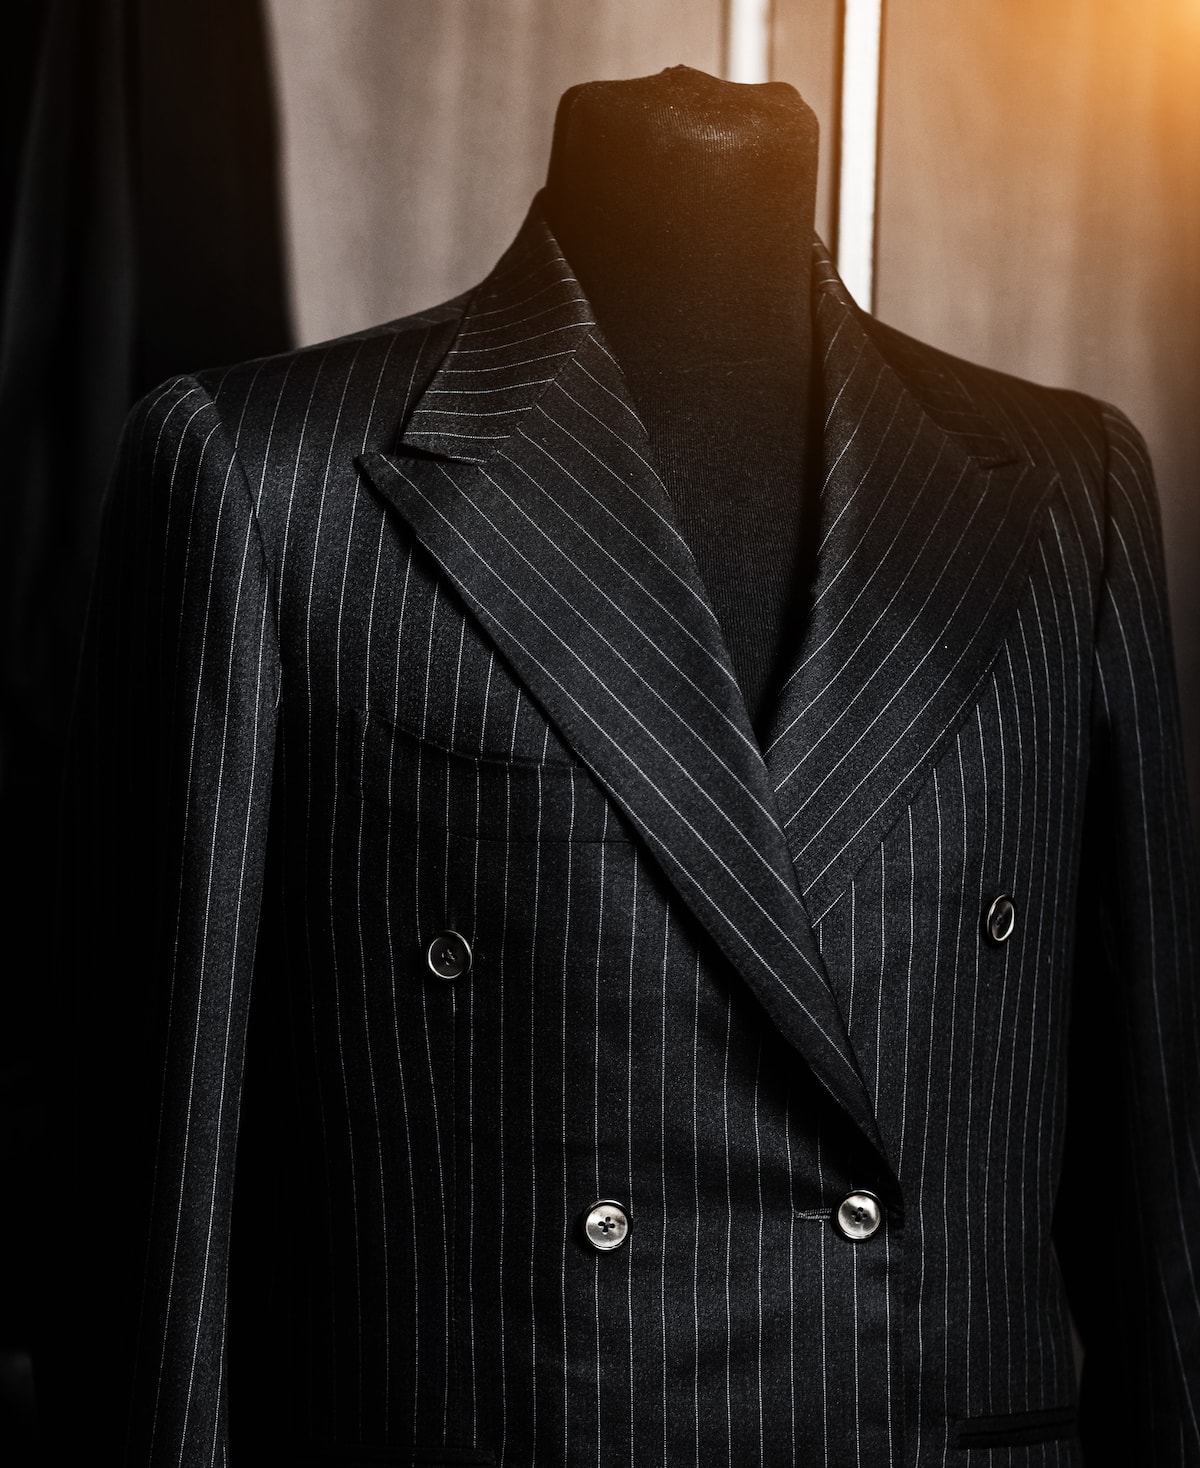 Most Expensive Suits - Bespoke Suit Guide | Fully Canvased Bespoke Suits |  London Bespoke Tailor - Apsley Tailors